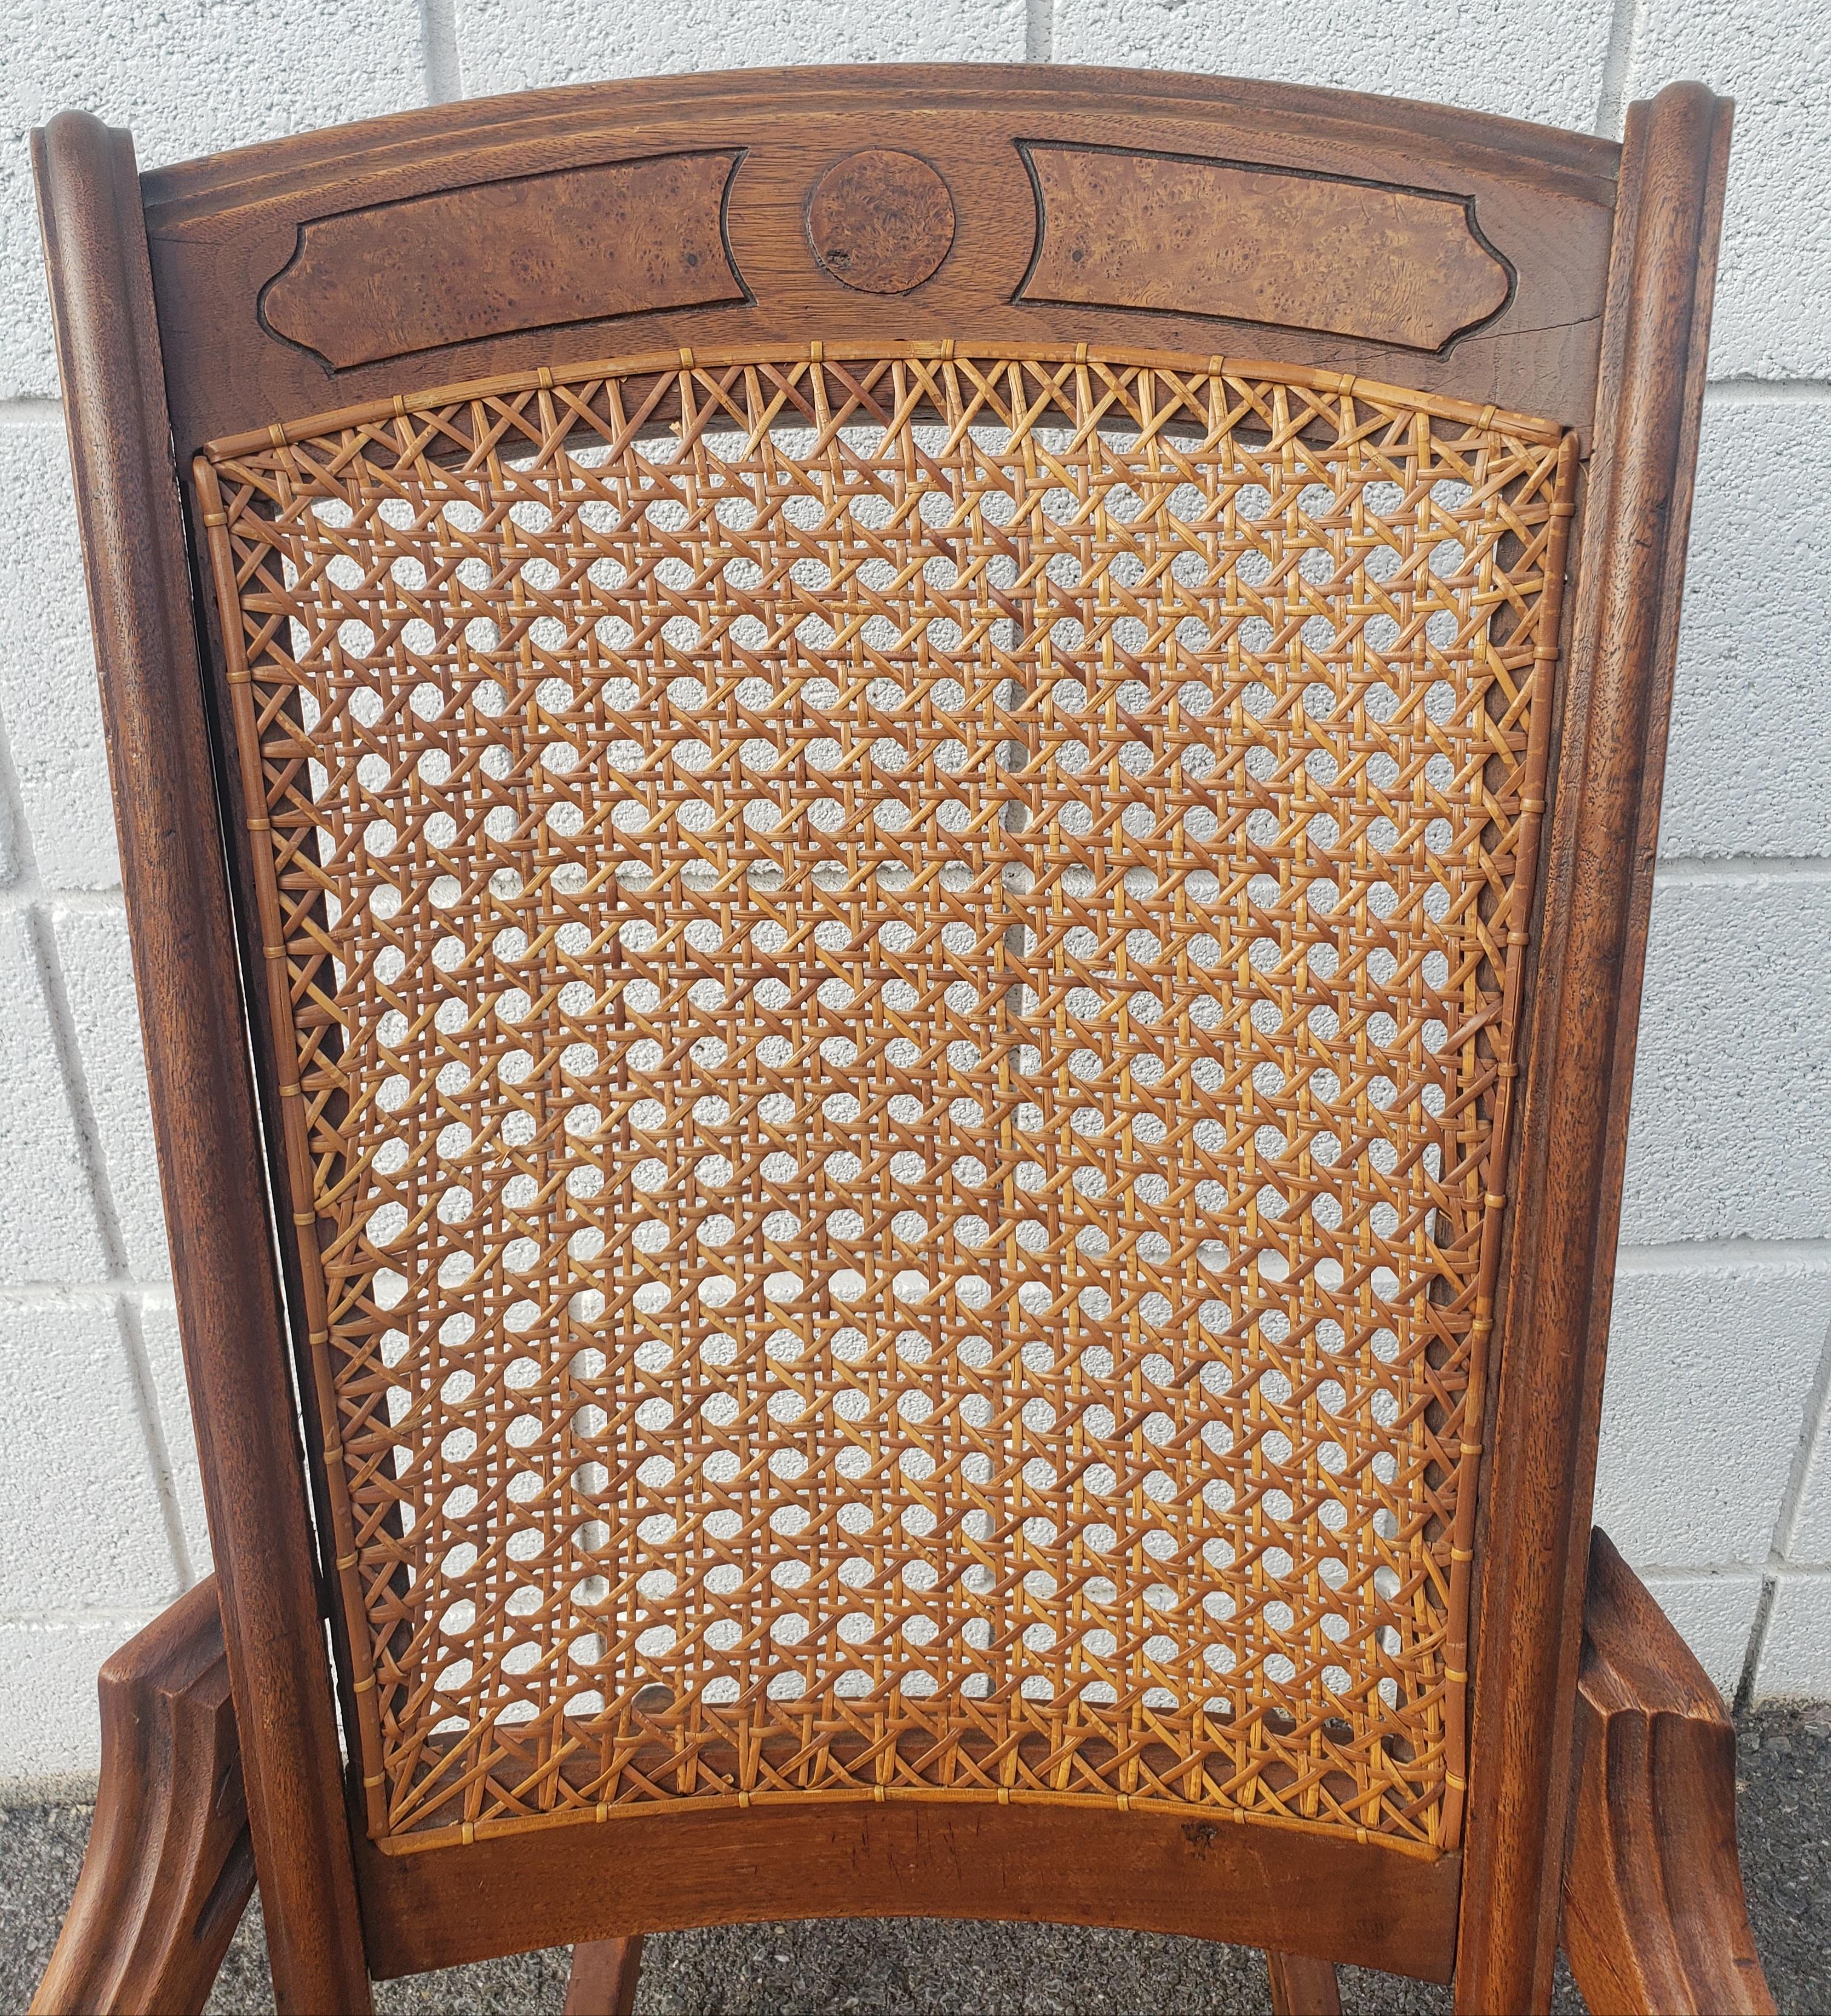 A Victorian Walnut and Cane Seat Rocking Chair in good antique condition measuring 19